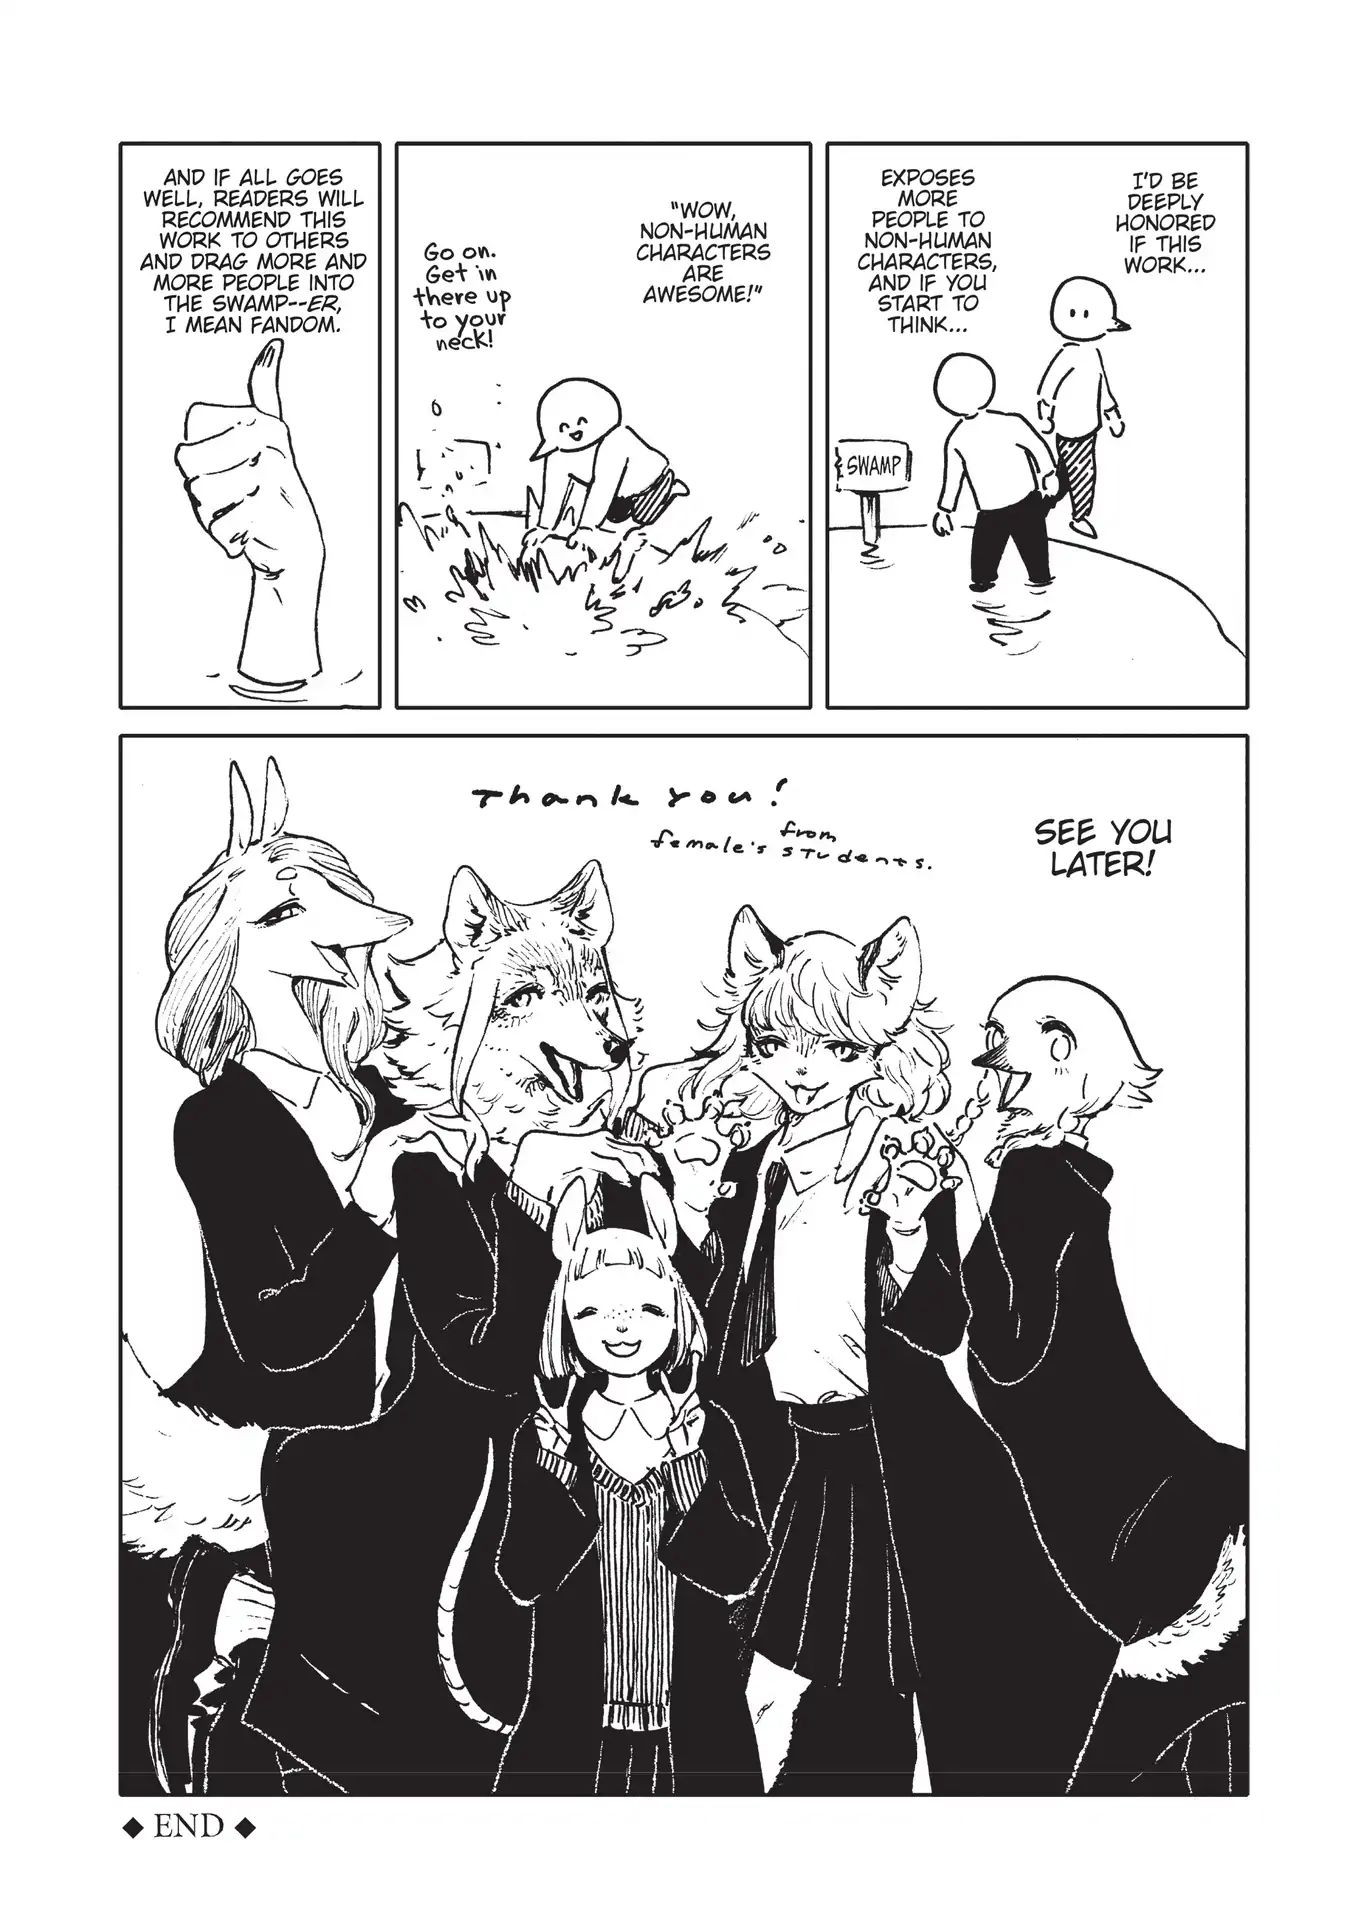 The Wize Wize Beasts Of The Wizarding Wizdoms - Page 2